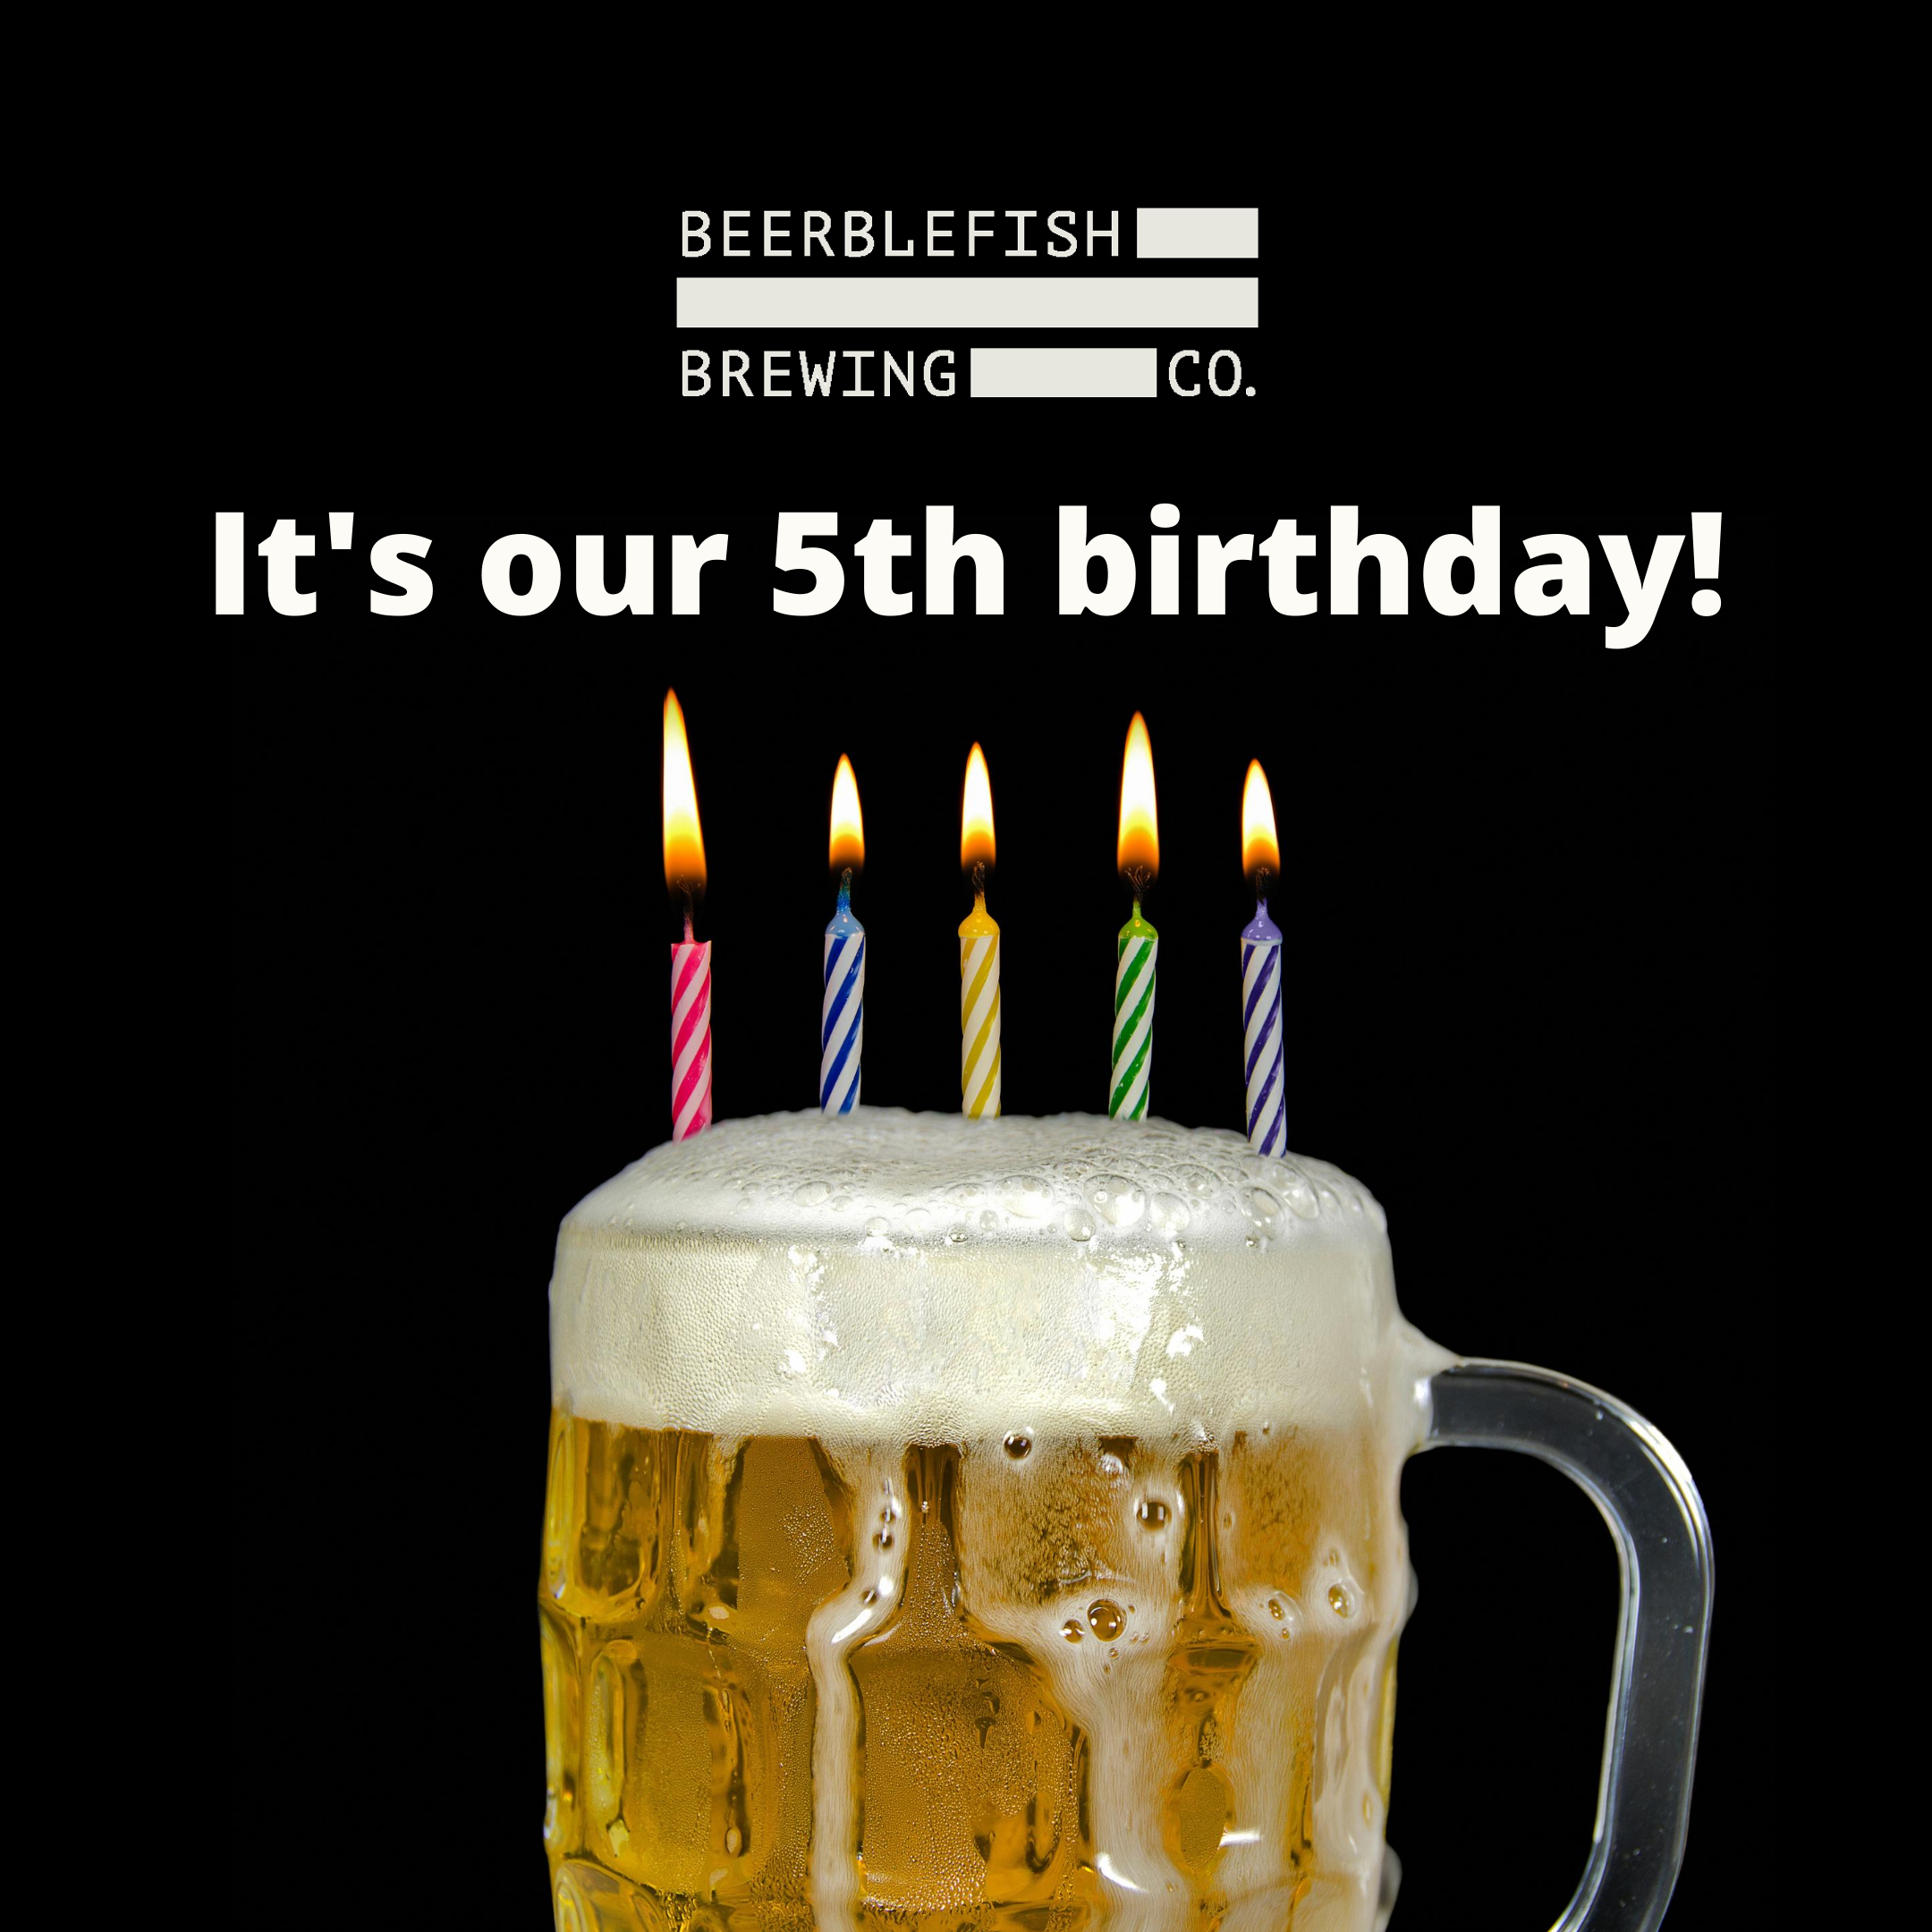 It’s Our Fifth Birthday!